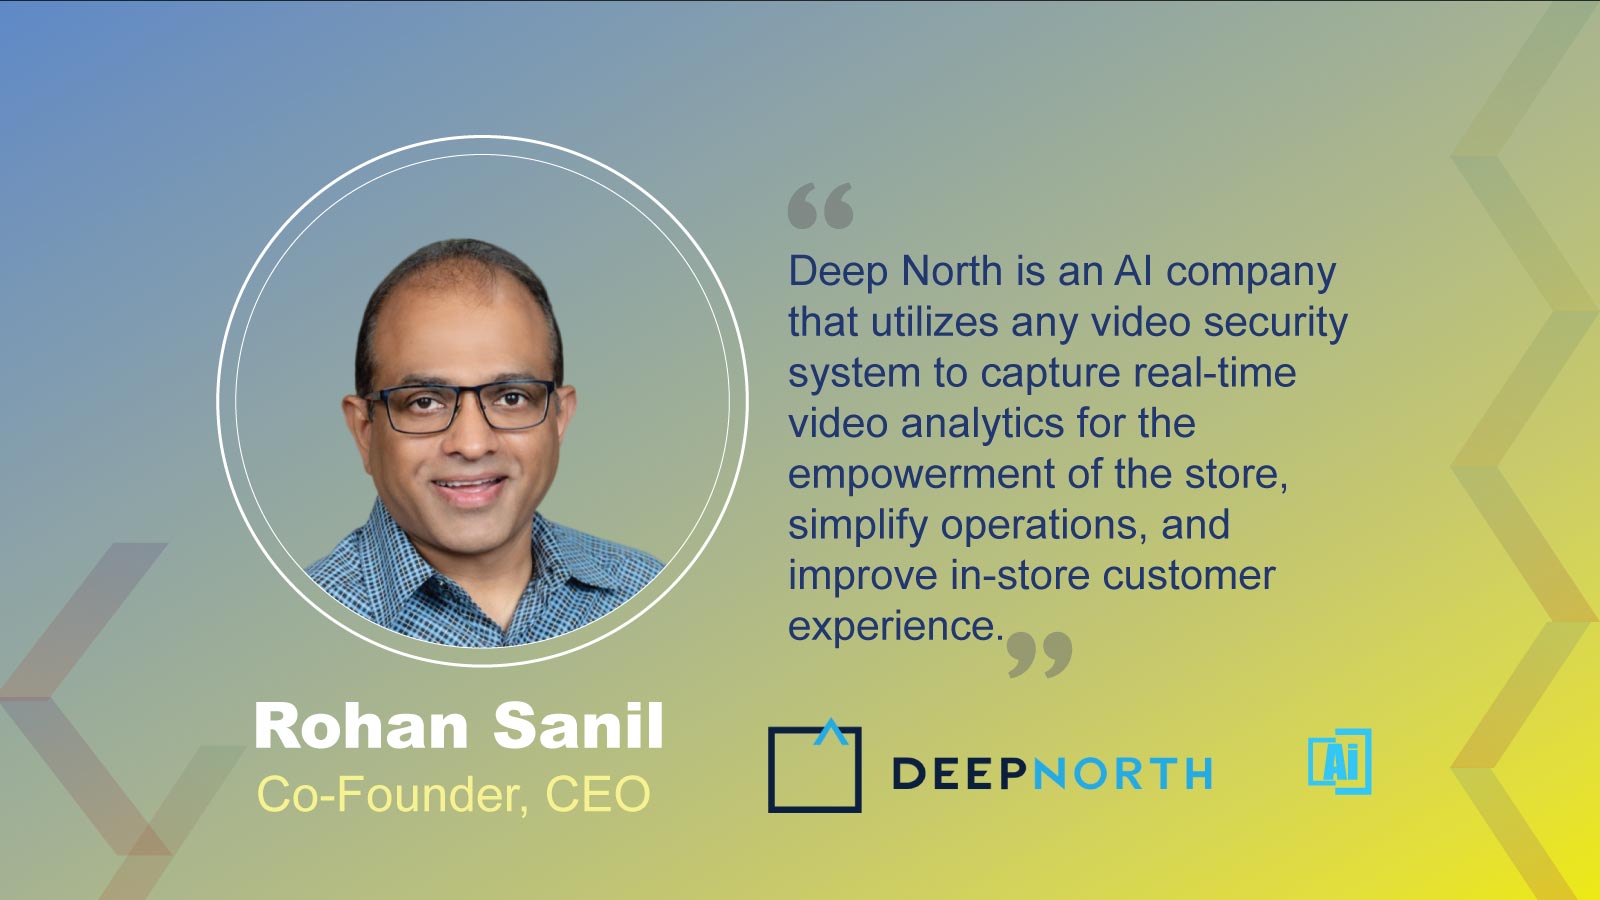 Rohan Sanil, Co-Founder and CEO at Deep North